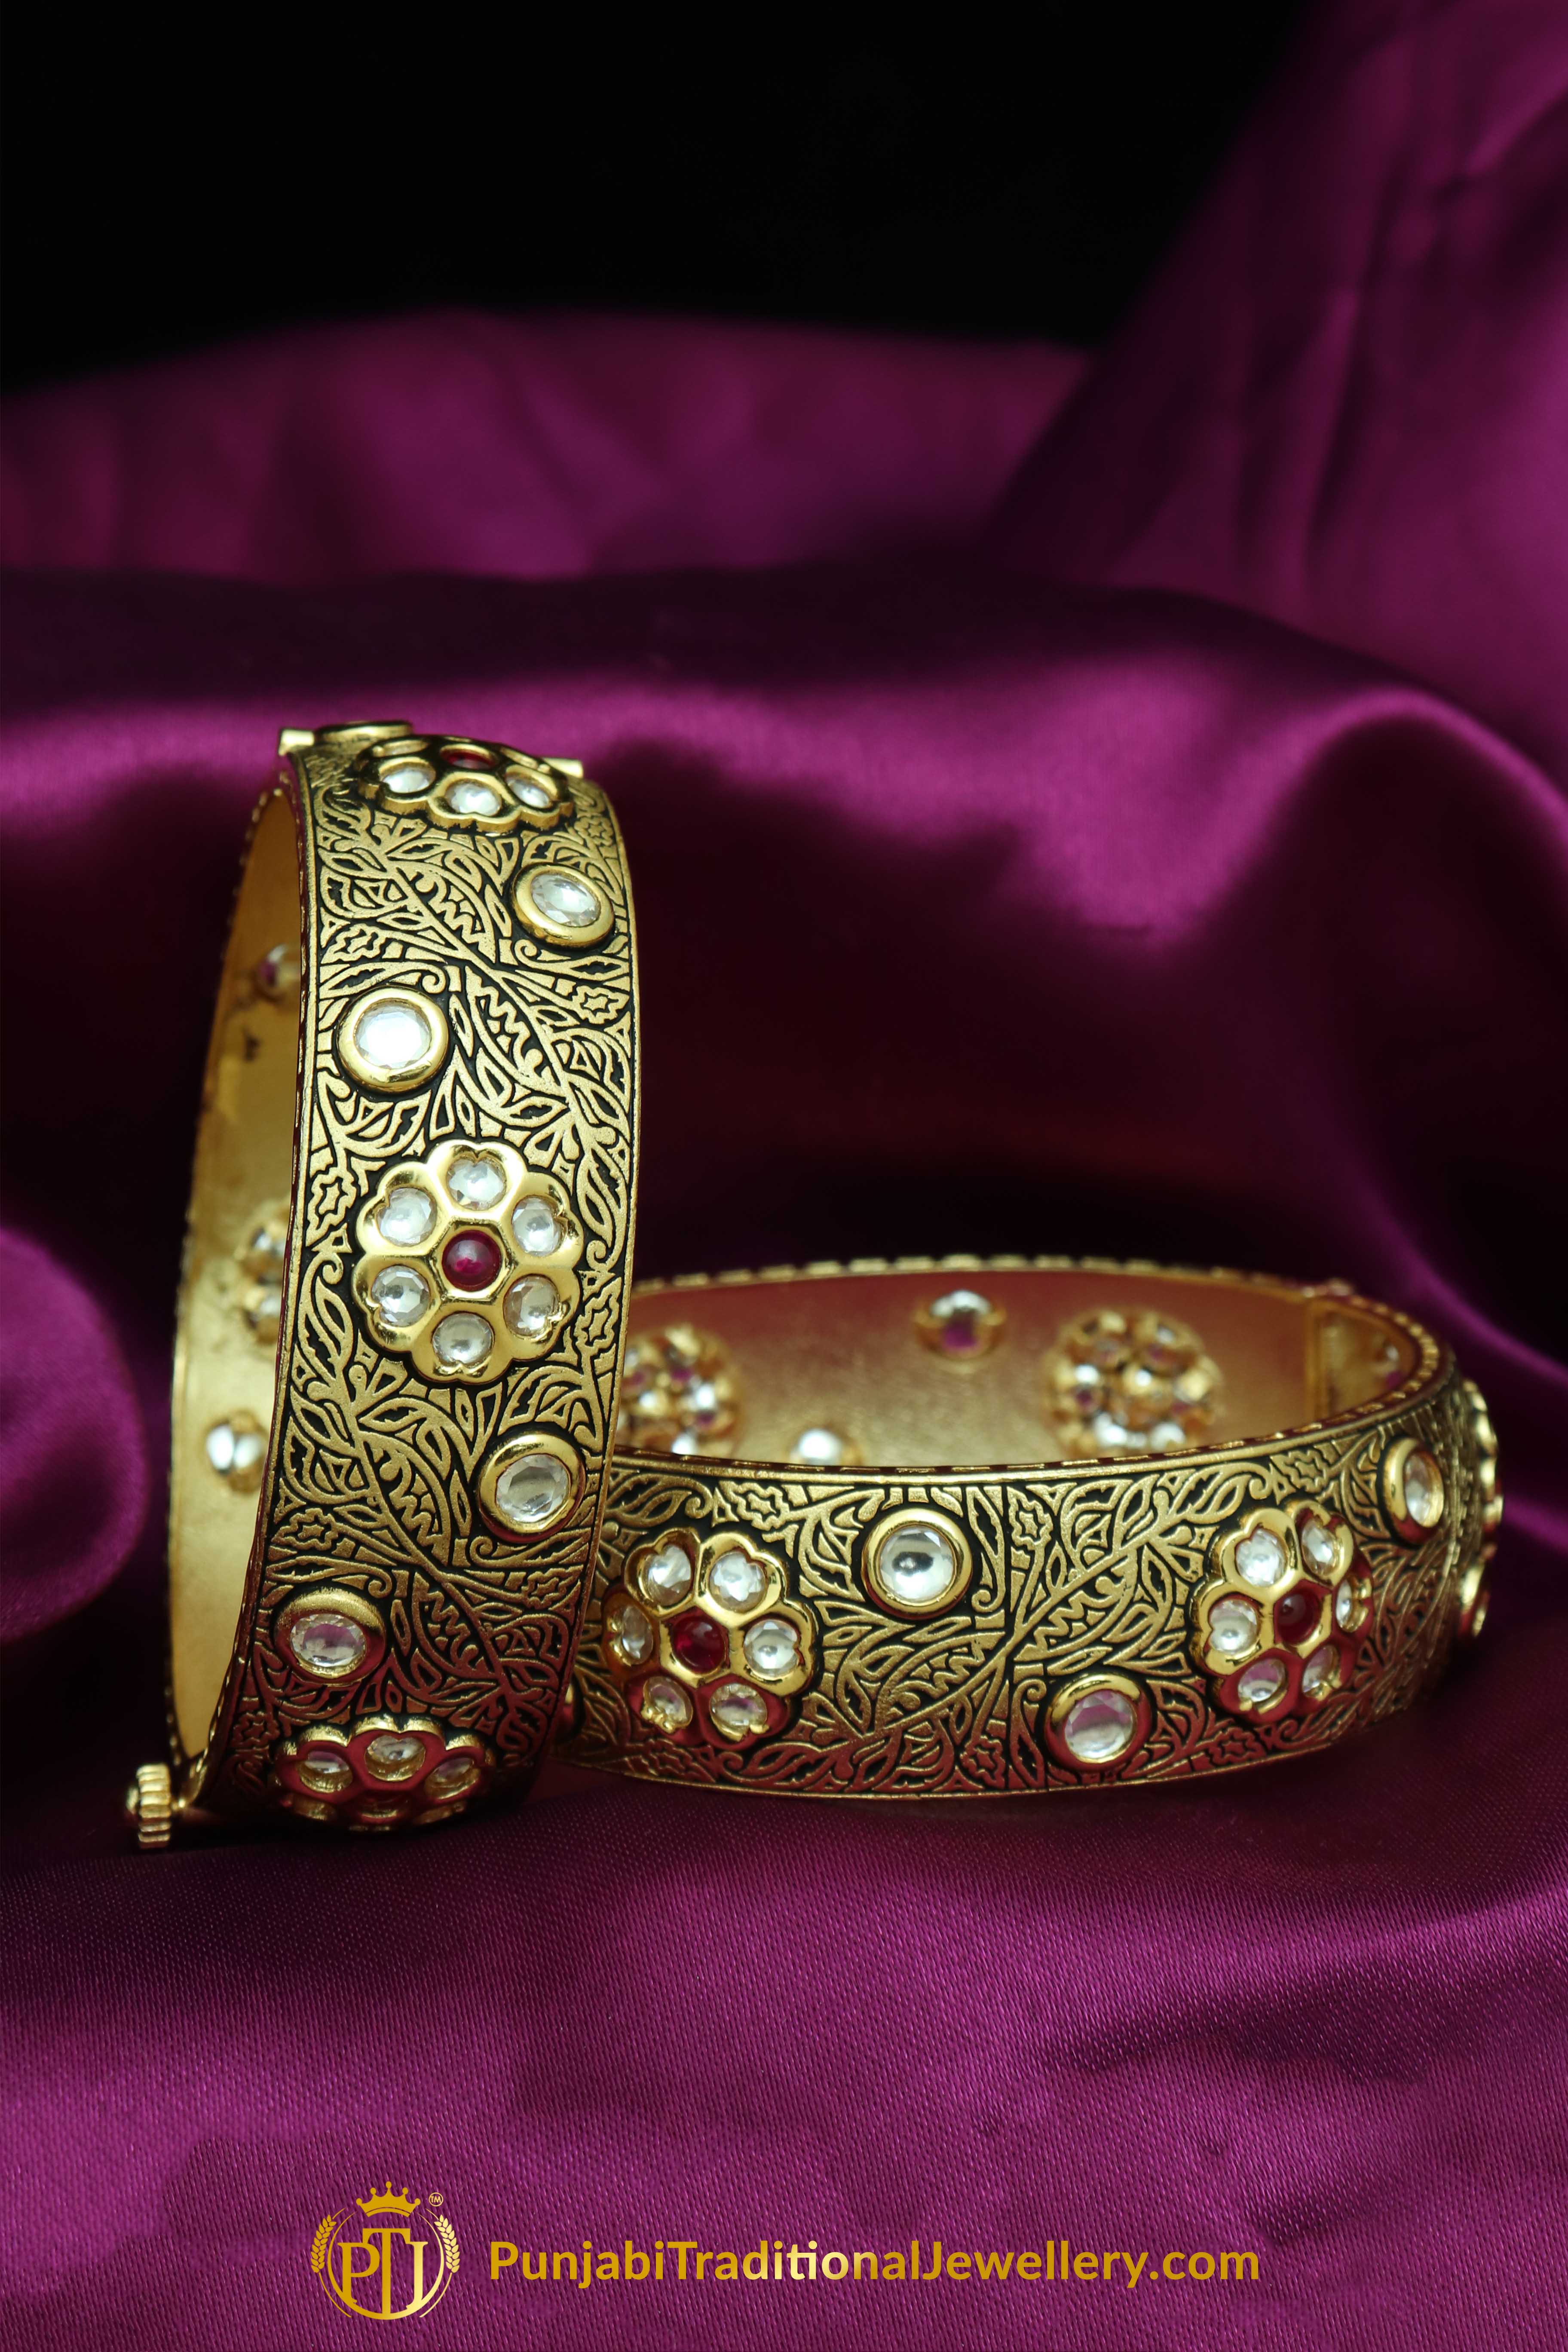 Farhat Antique Gold Finished Kundan Rubby Openable Karra Bangles (Pair) | Punjabi Traditional Jewellery Exclusive